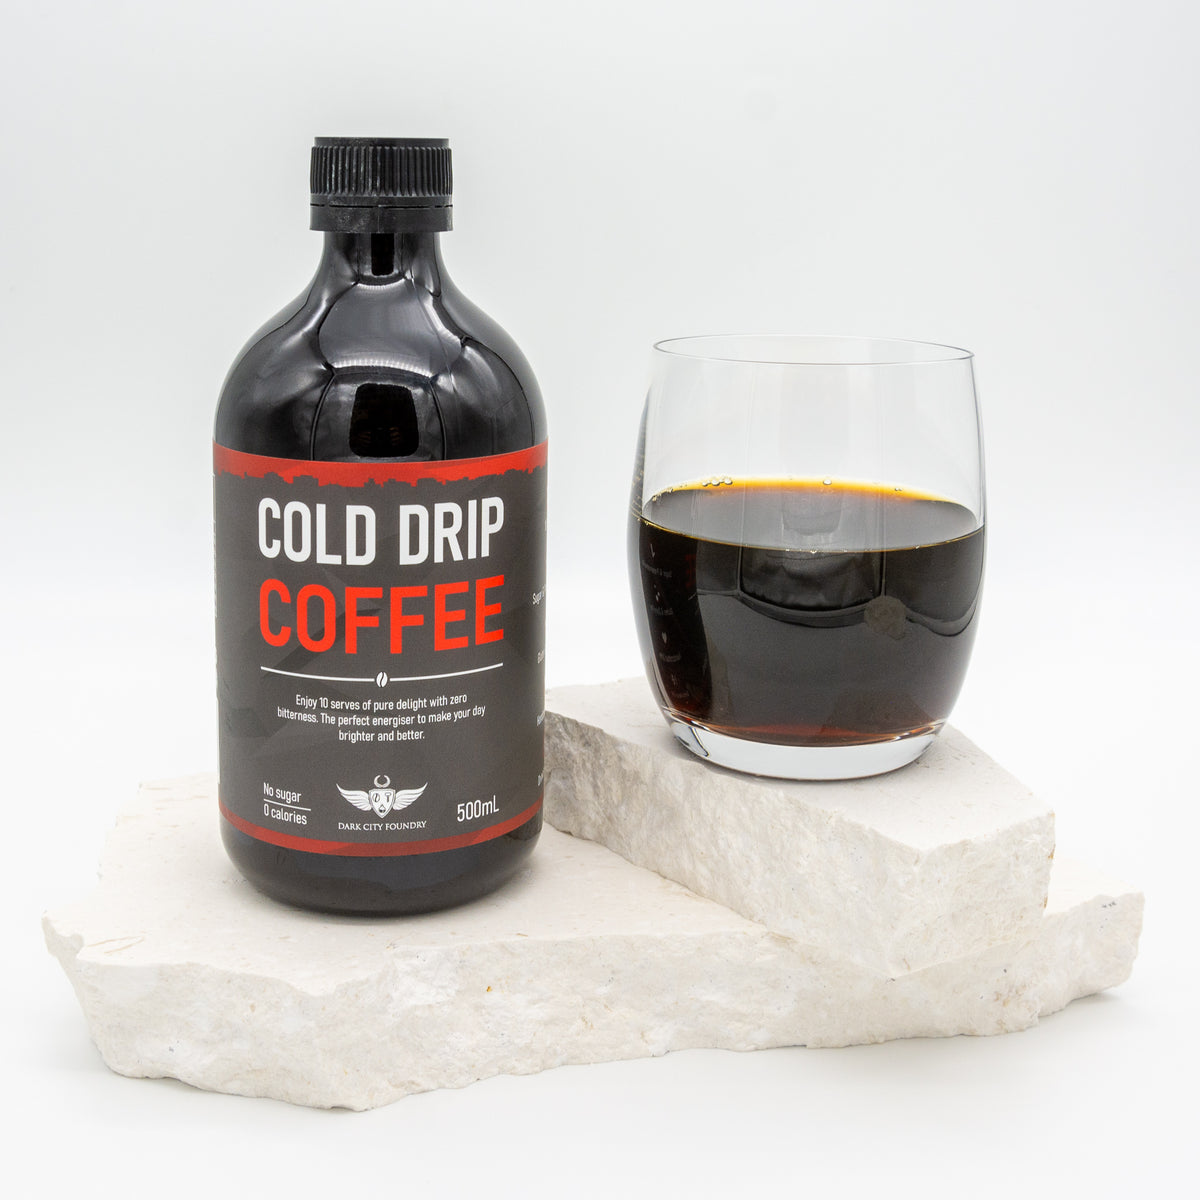 500ml bottle of cold drip coffee pictured with a glass of coffee next to it